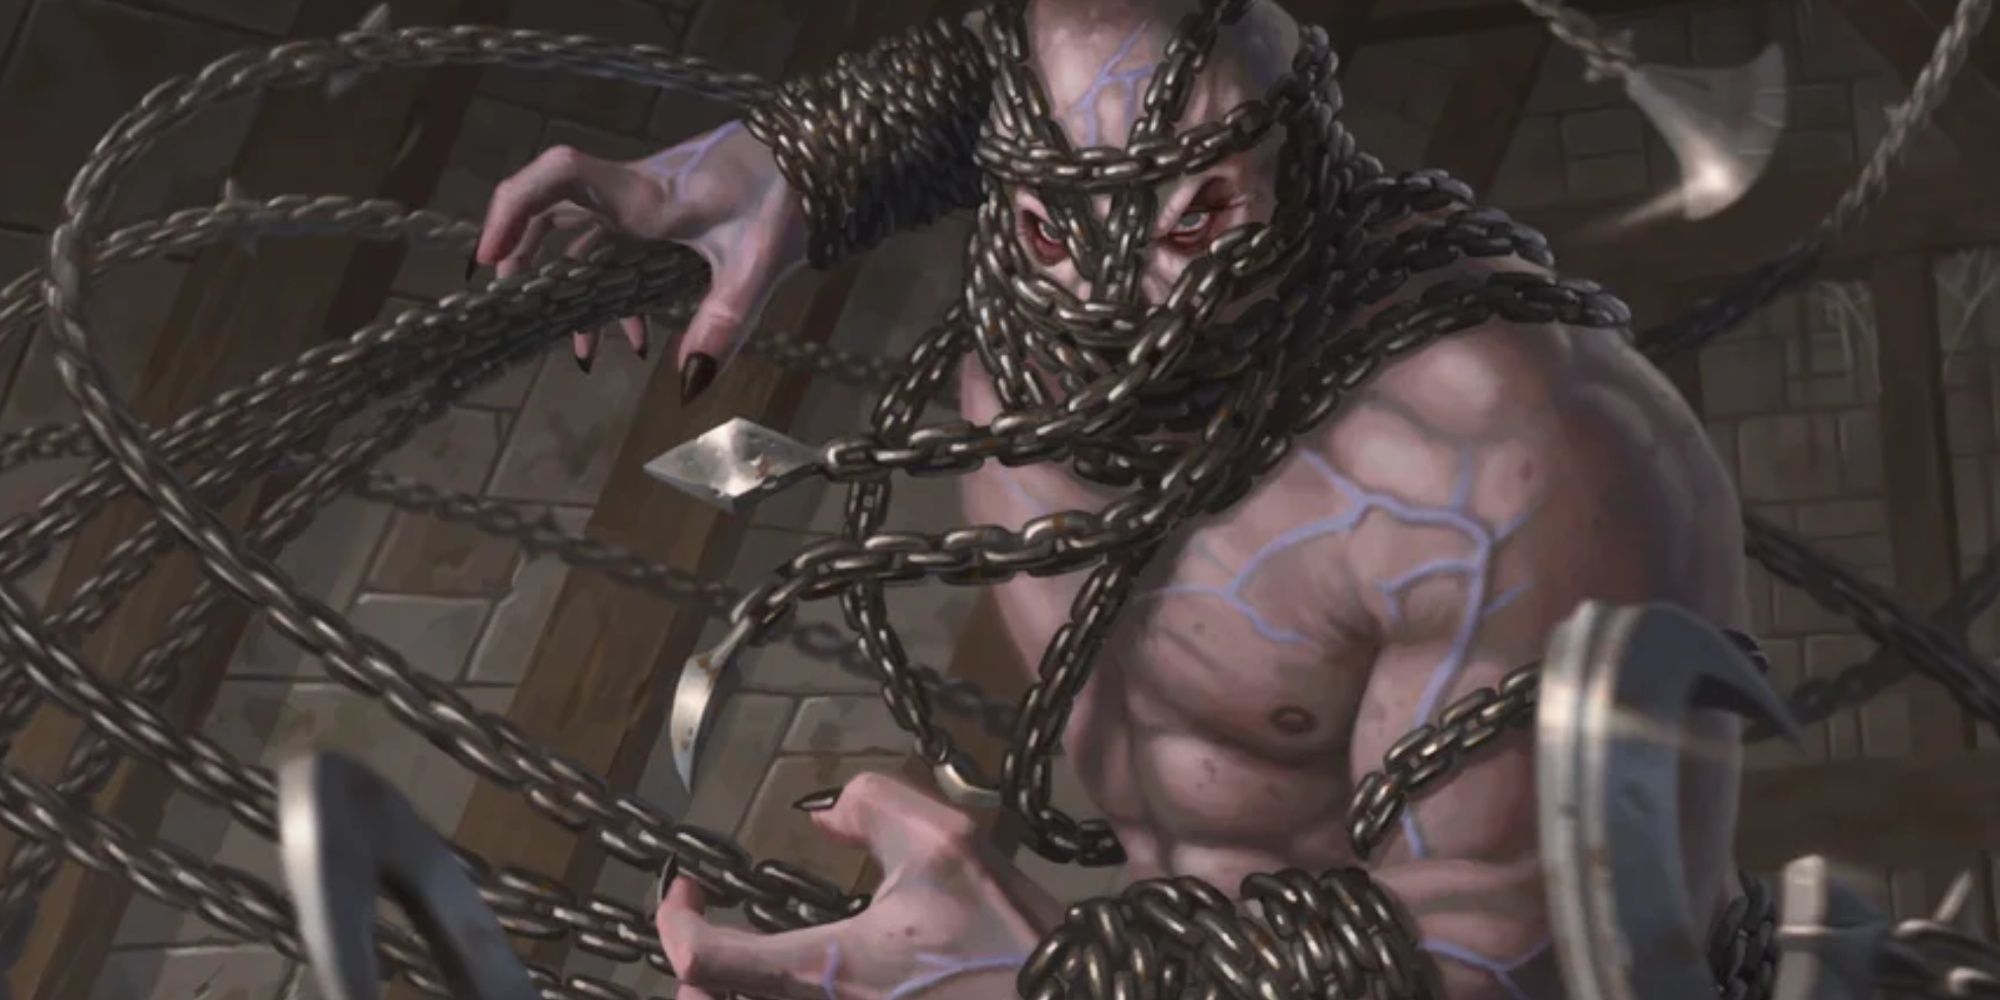 A Dungeons and Dragons character covered in chains